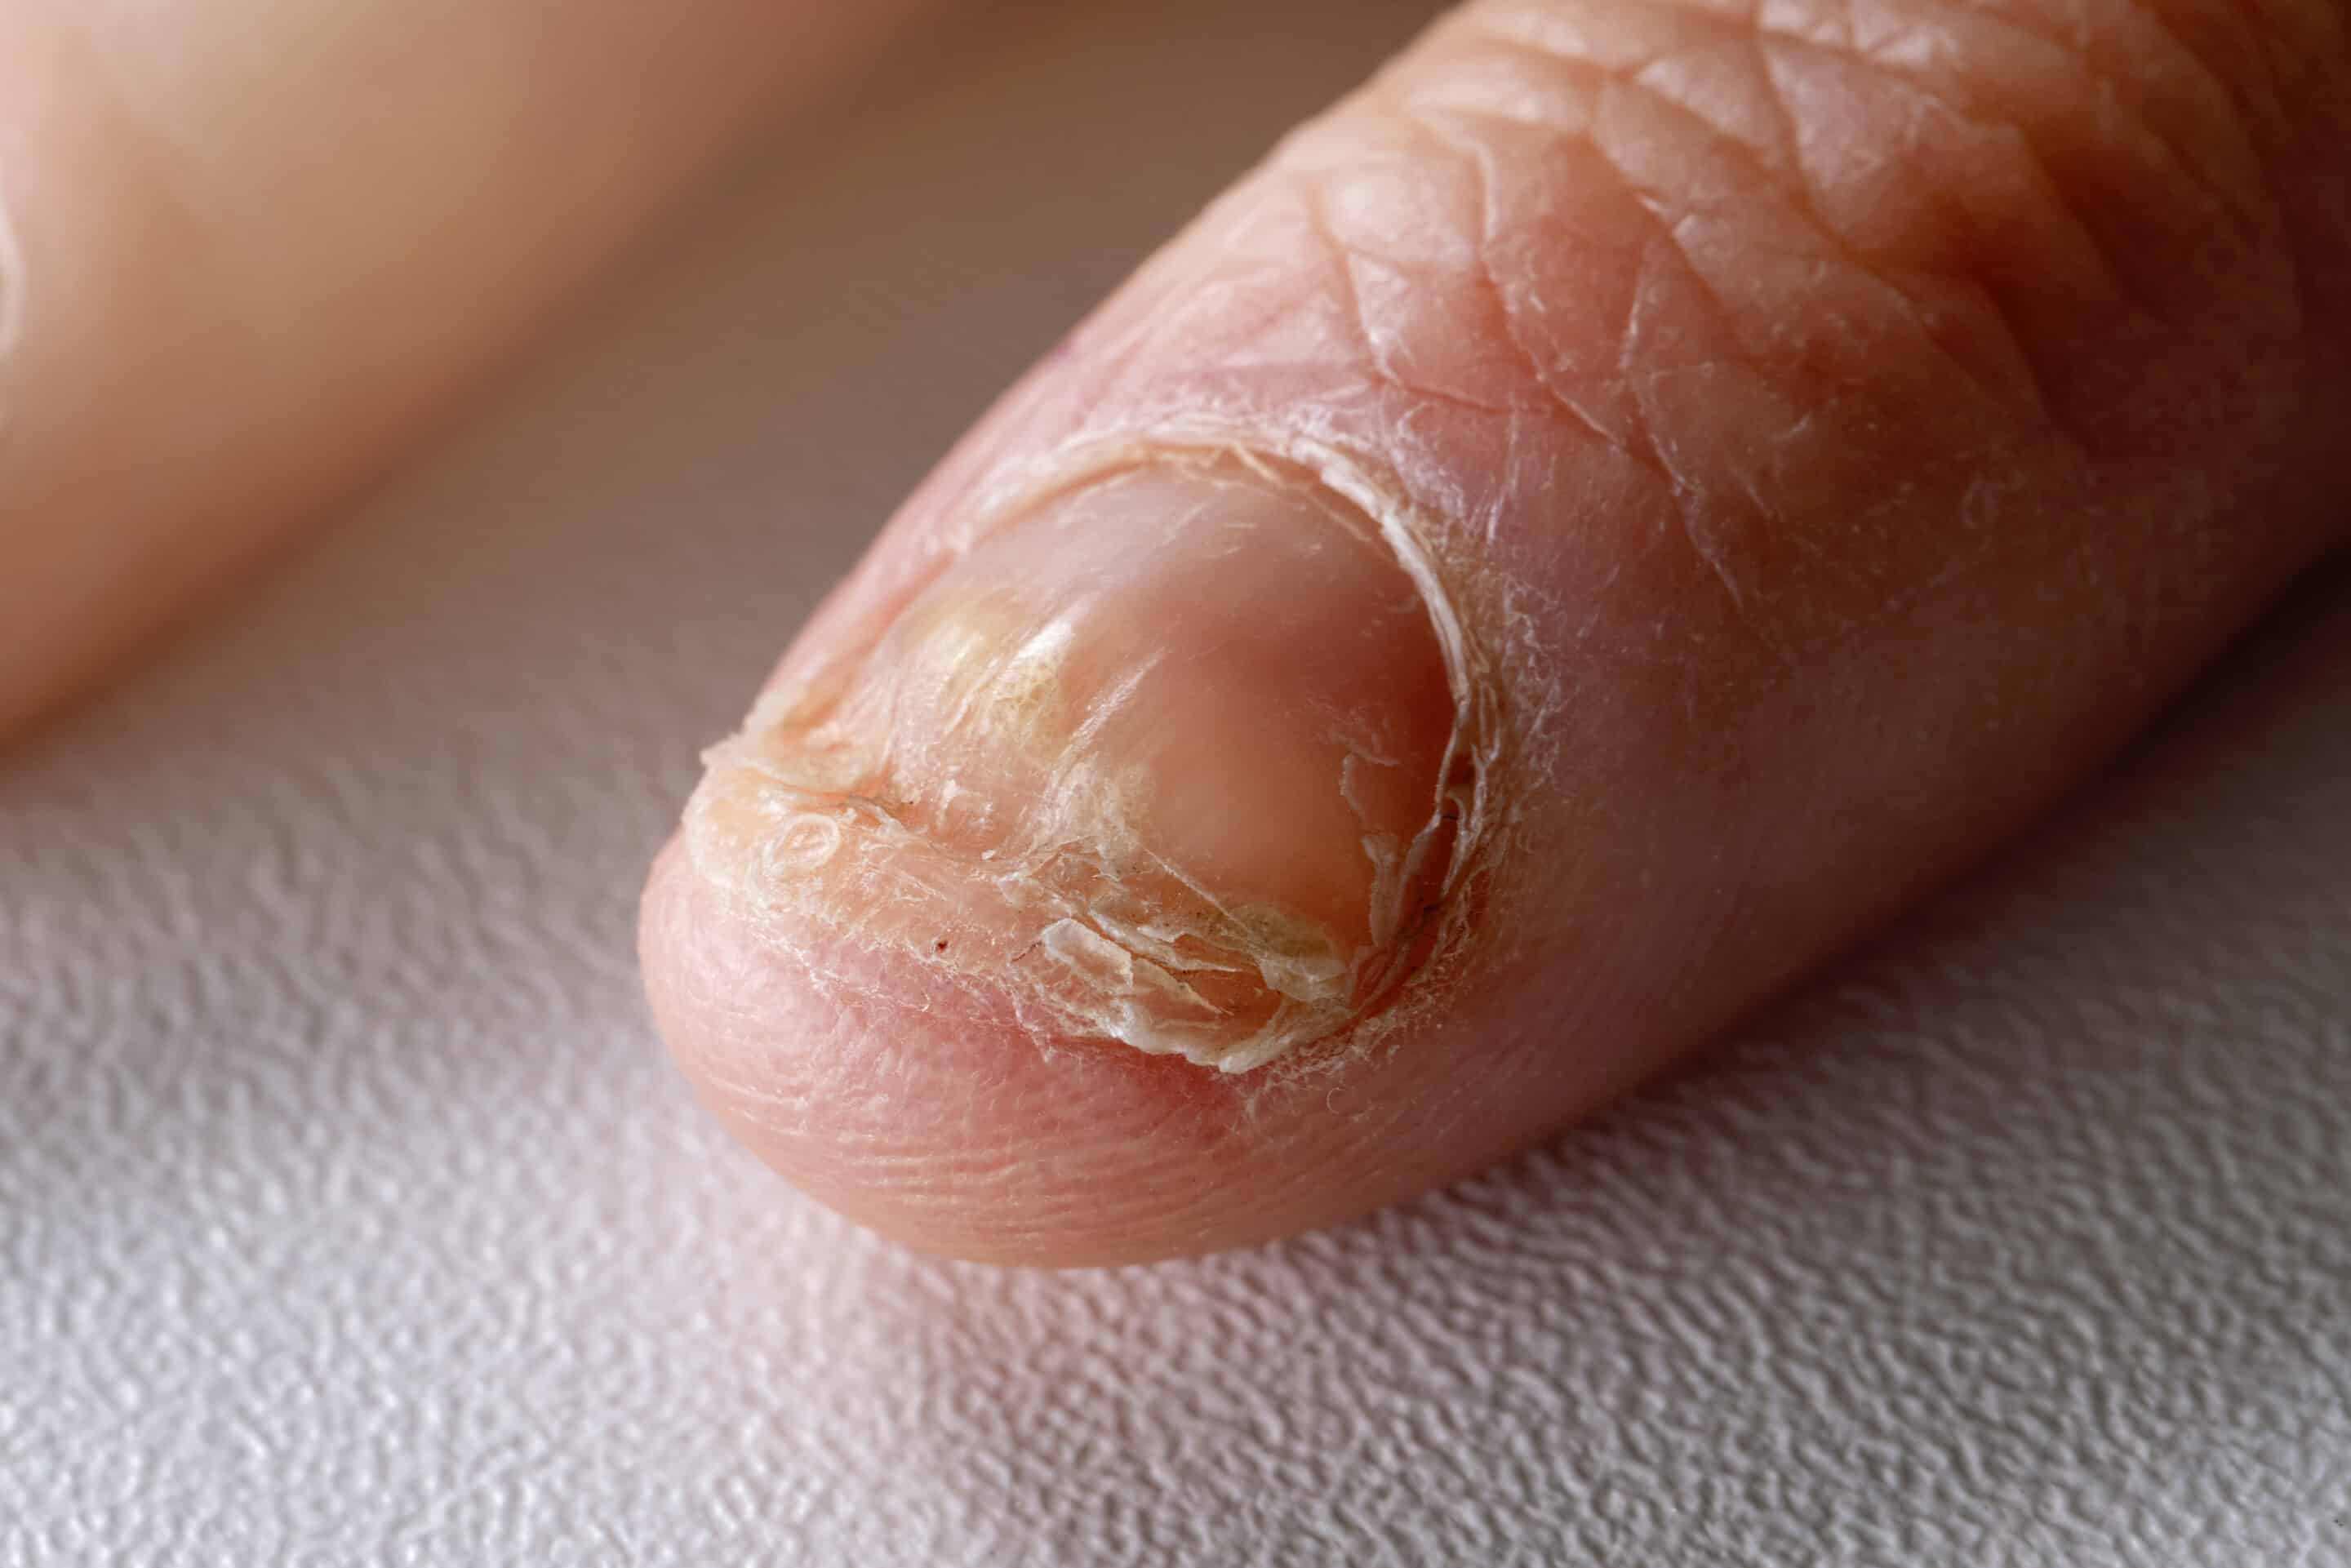 nail bed infection